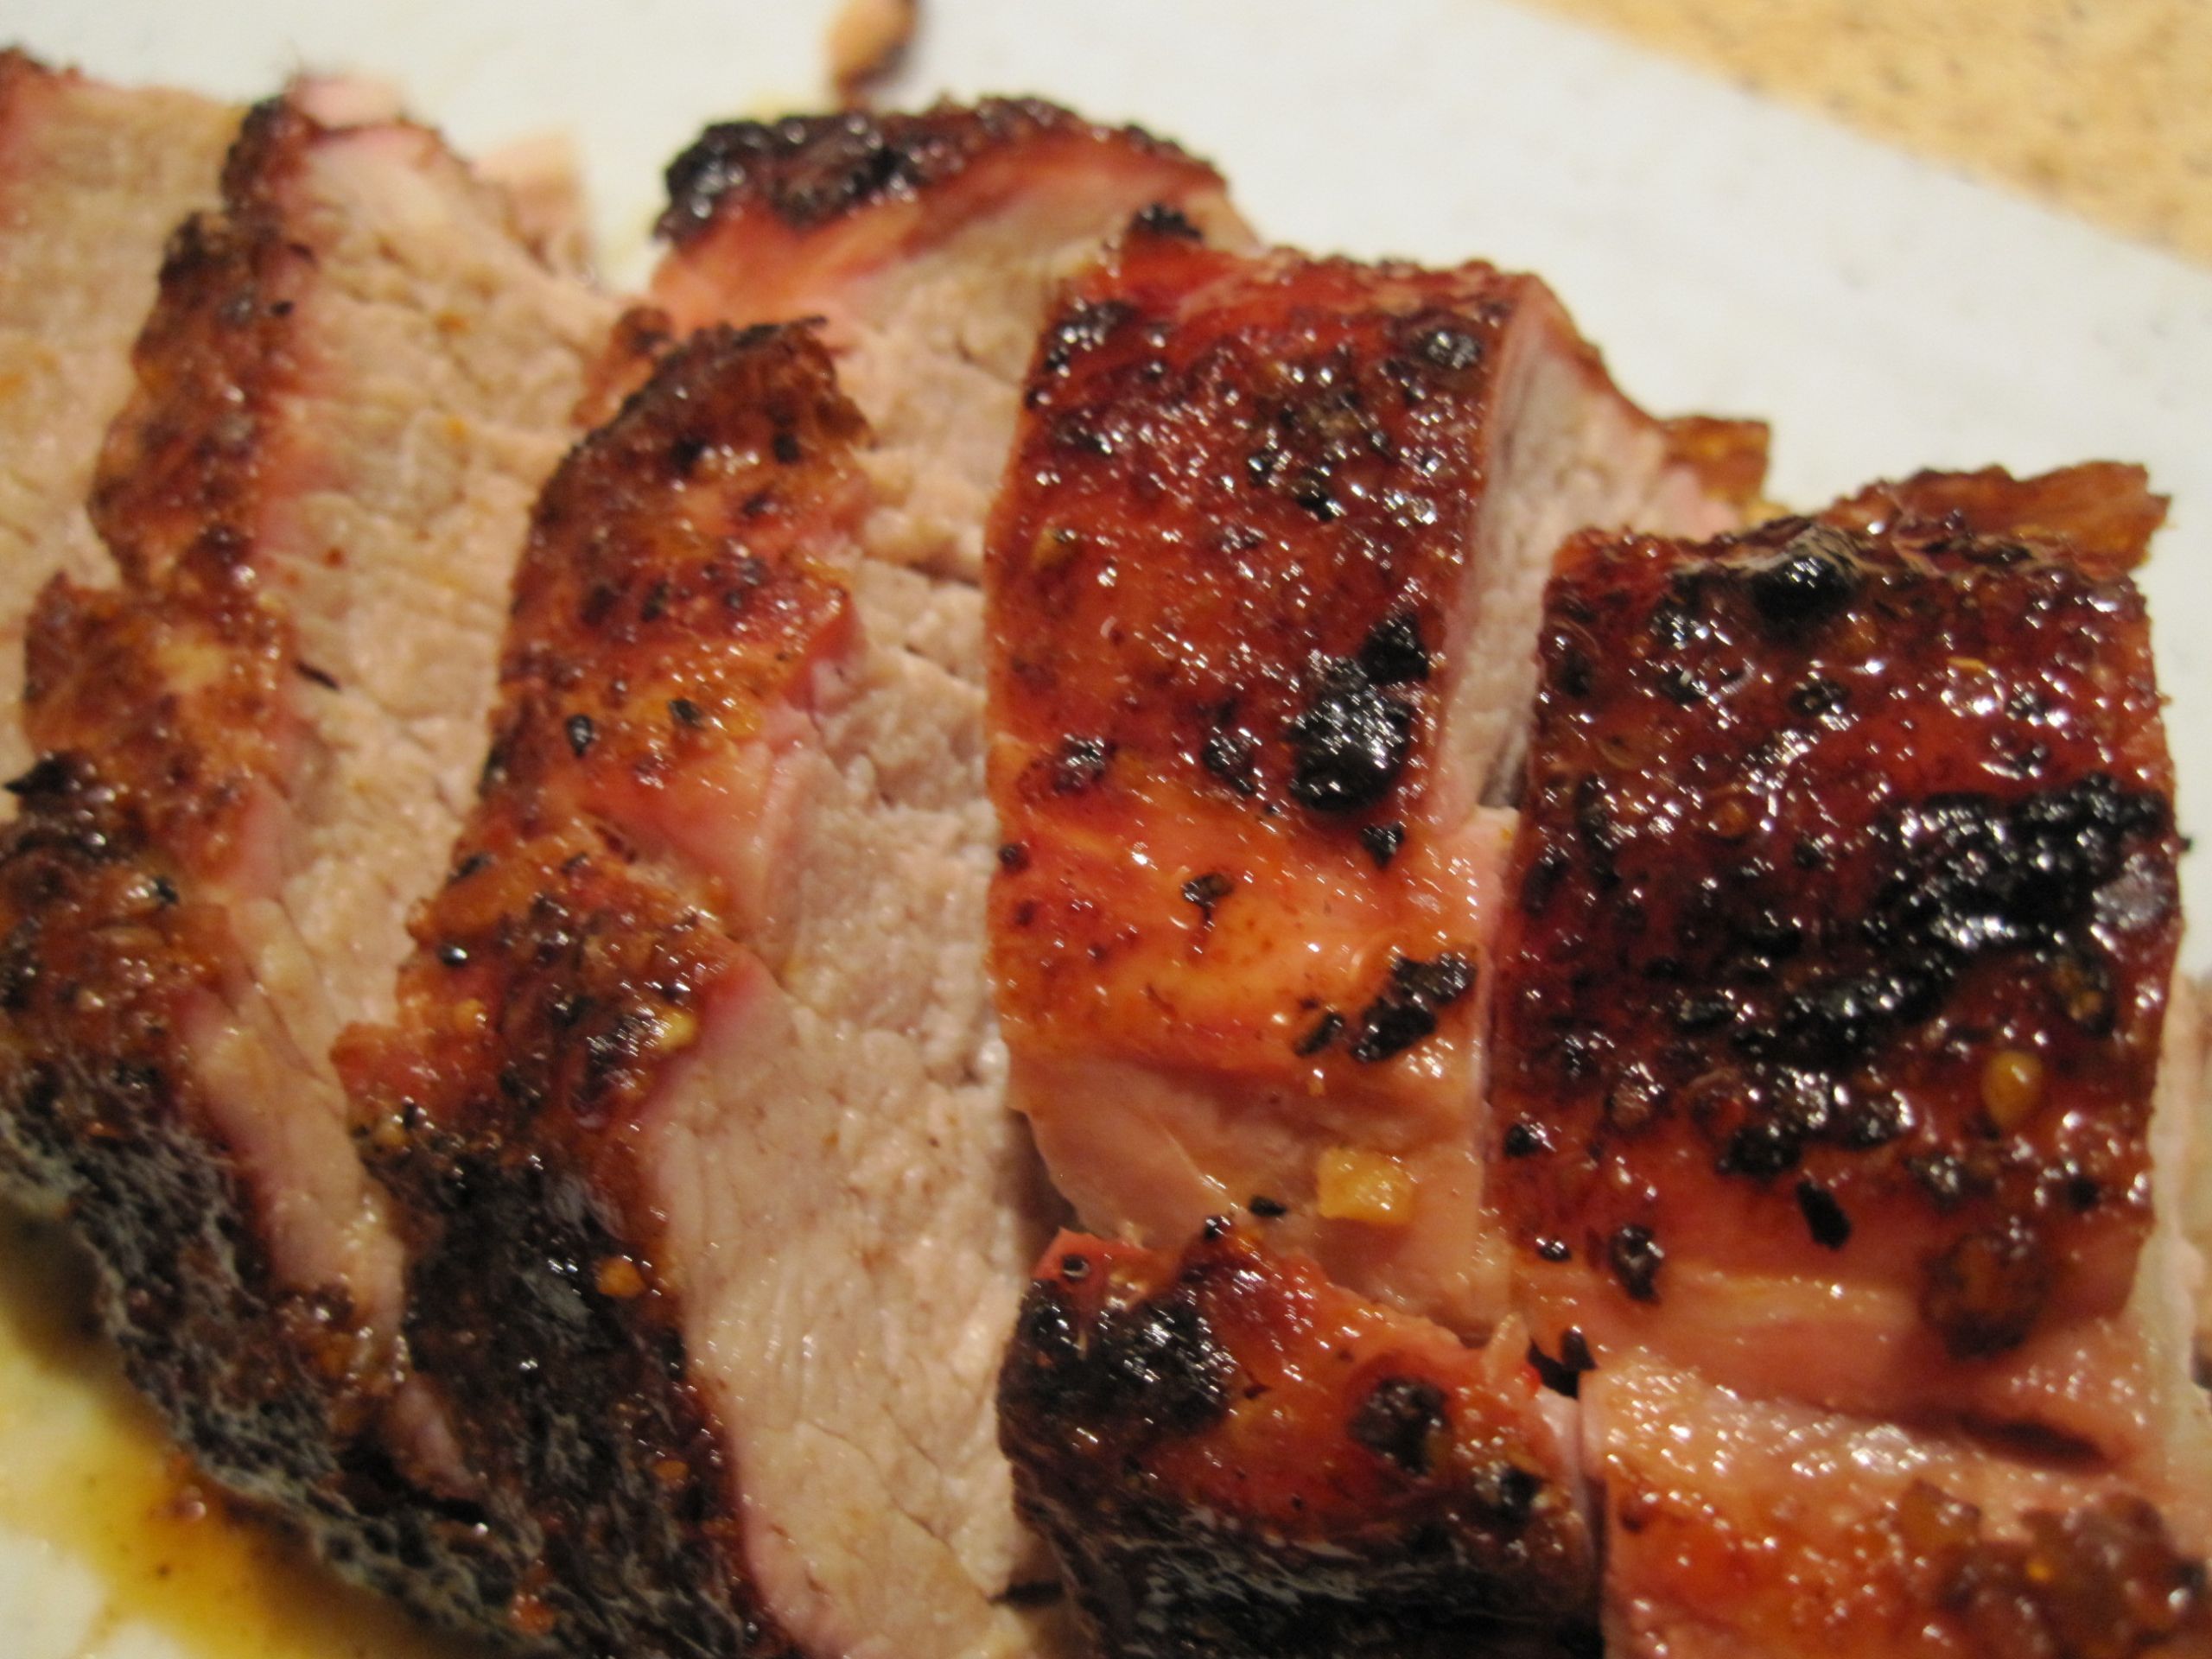 Cooking Pork Loin On Grill
 Grilled pork tenderloin with red pepper jelly glaze